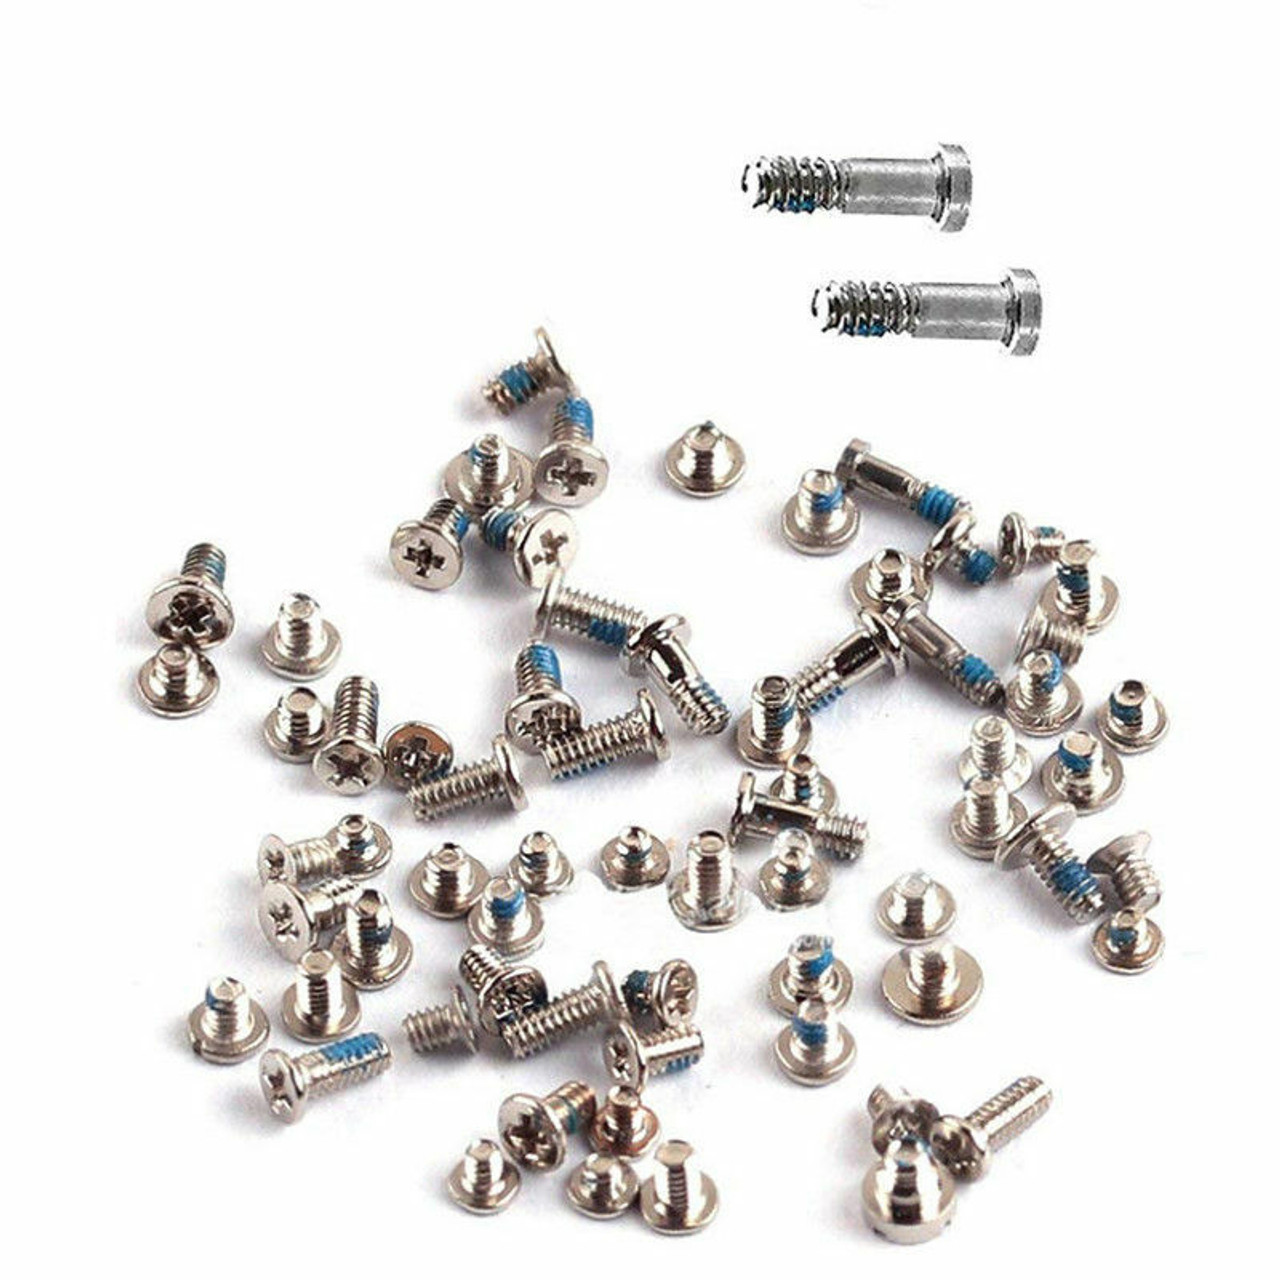 OEM SPEC Full Screw Set with Bottom Replacements For iPhone 6S 7 8 Plus 4.7 5.5